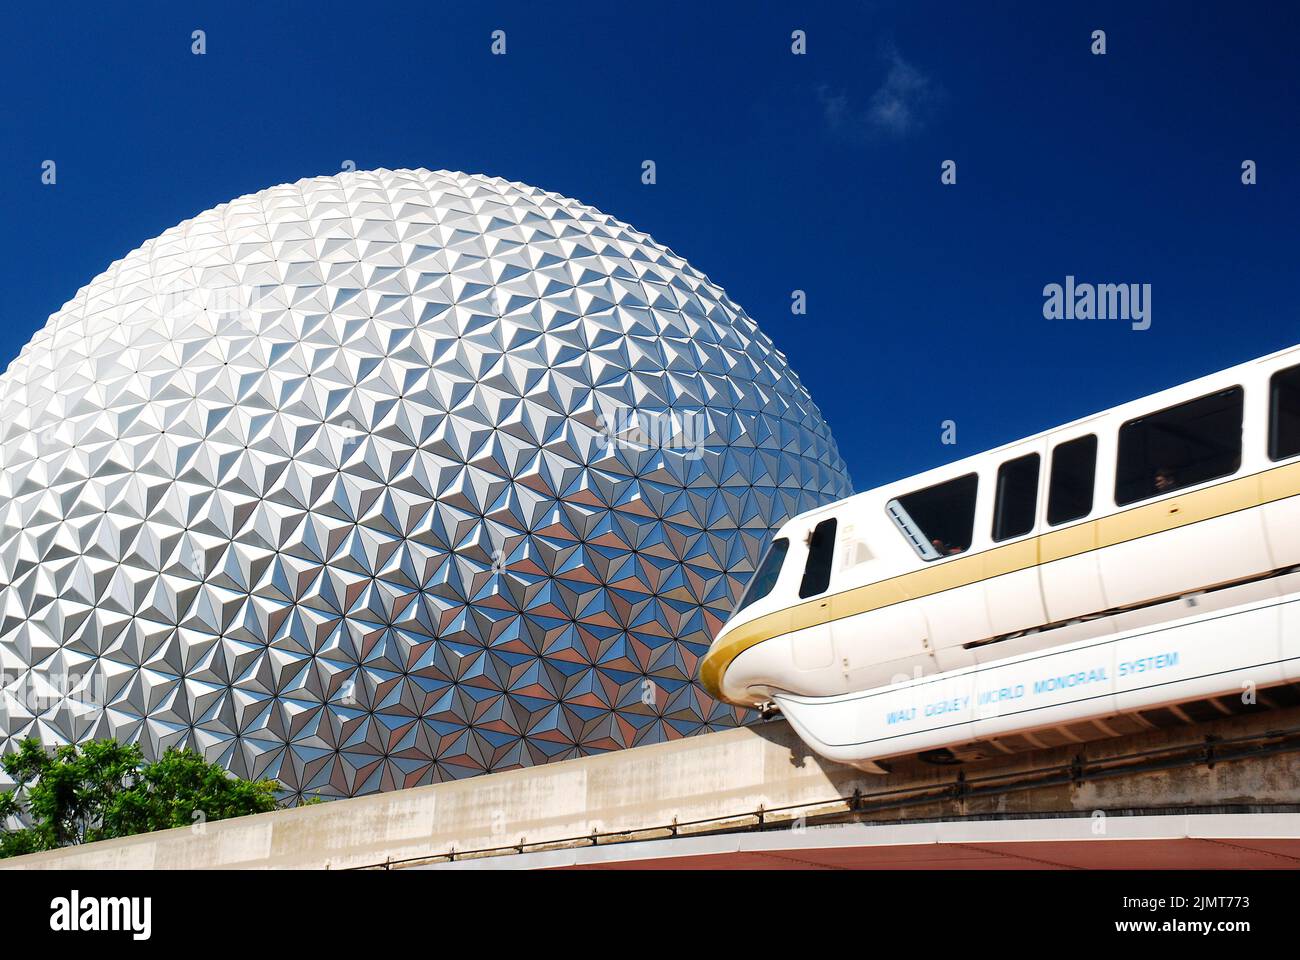 AA monorail travels in front of the sphere of Spaceship Earth, a large landmark at the Epcot Center of Walt Disney World in Orlando Florida Stock Photo